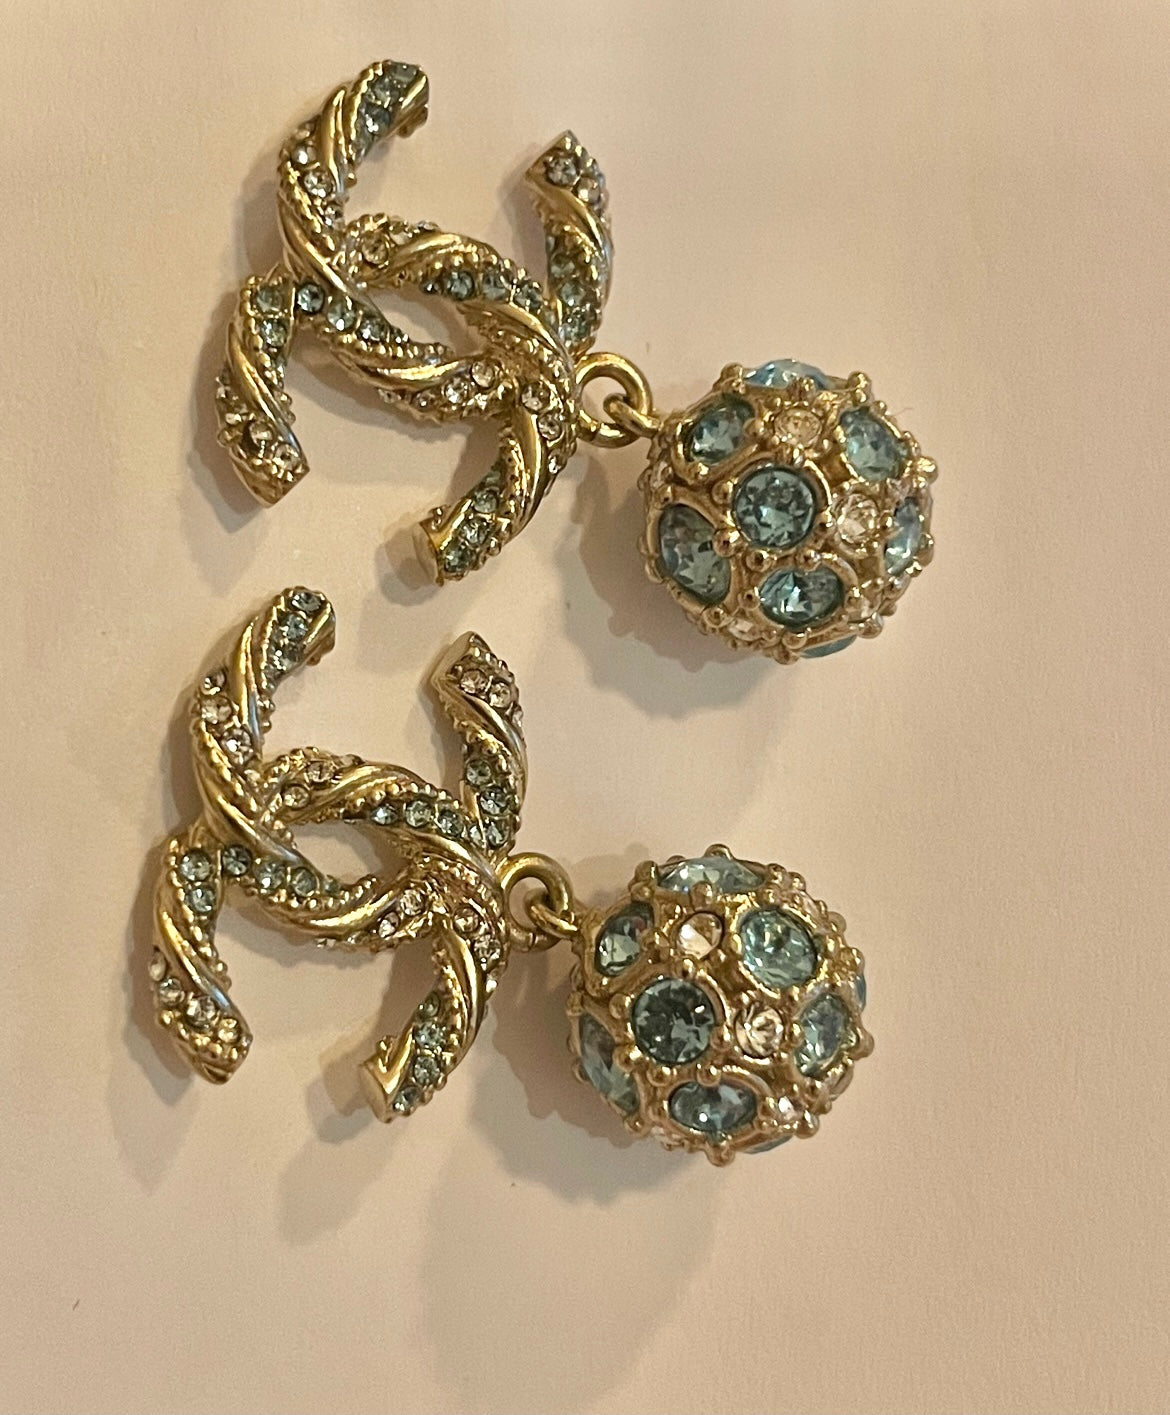 Chanel Drop Earrings With Blue Crystals - Lou's Closet